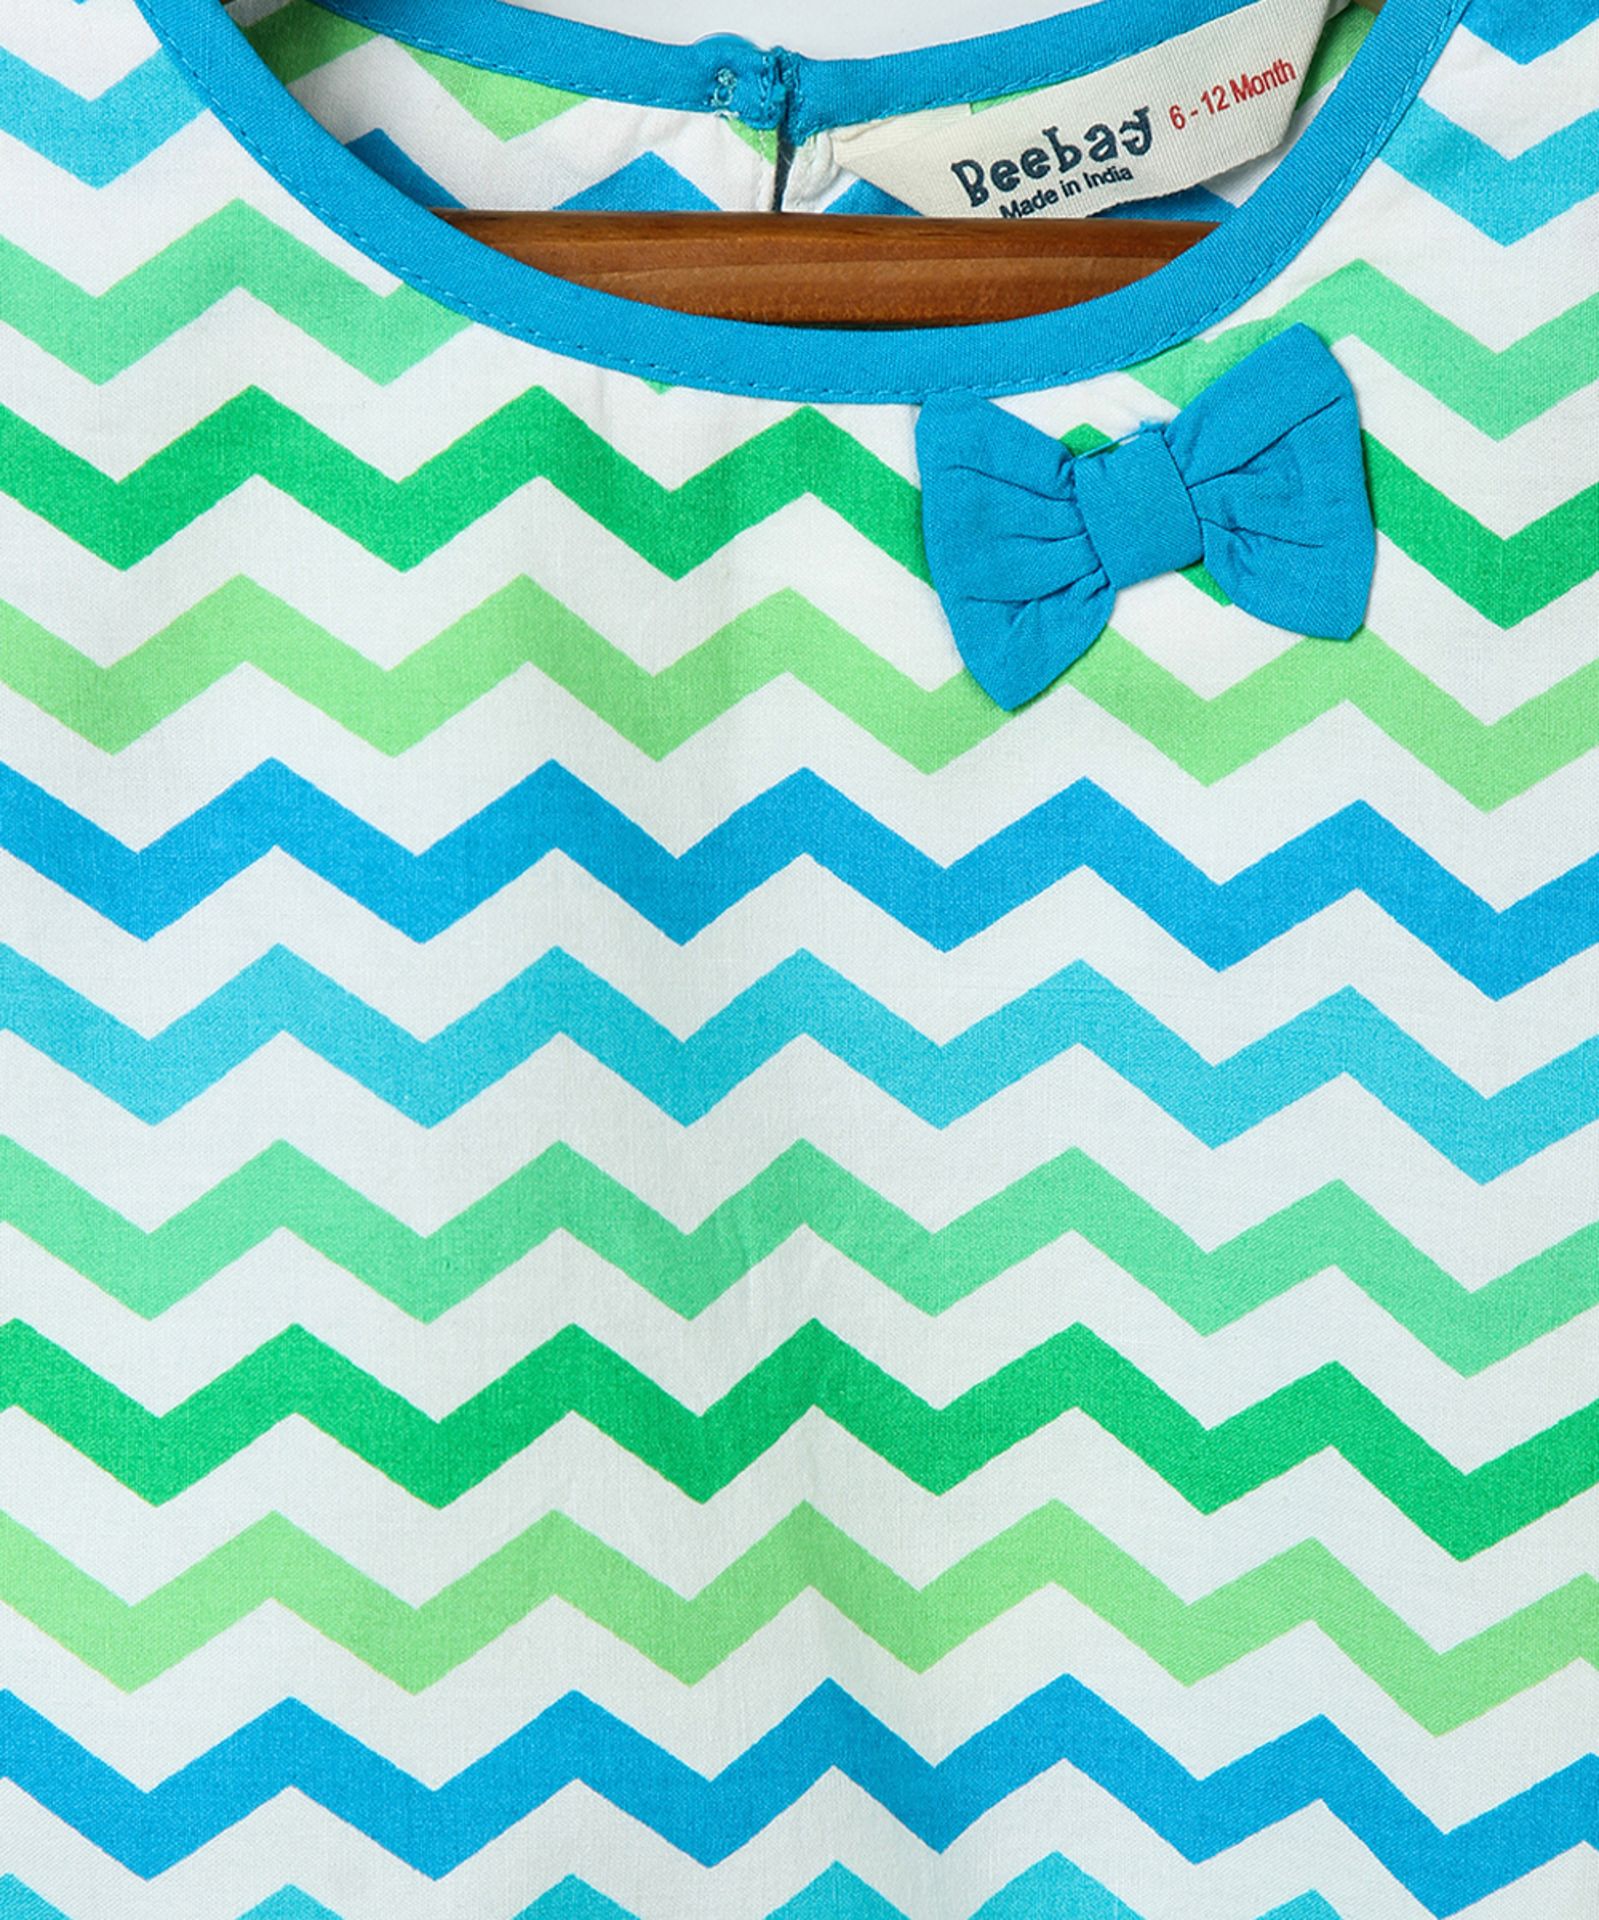 Green & Blue Chevron Top - Infant - Image 3 of 3